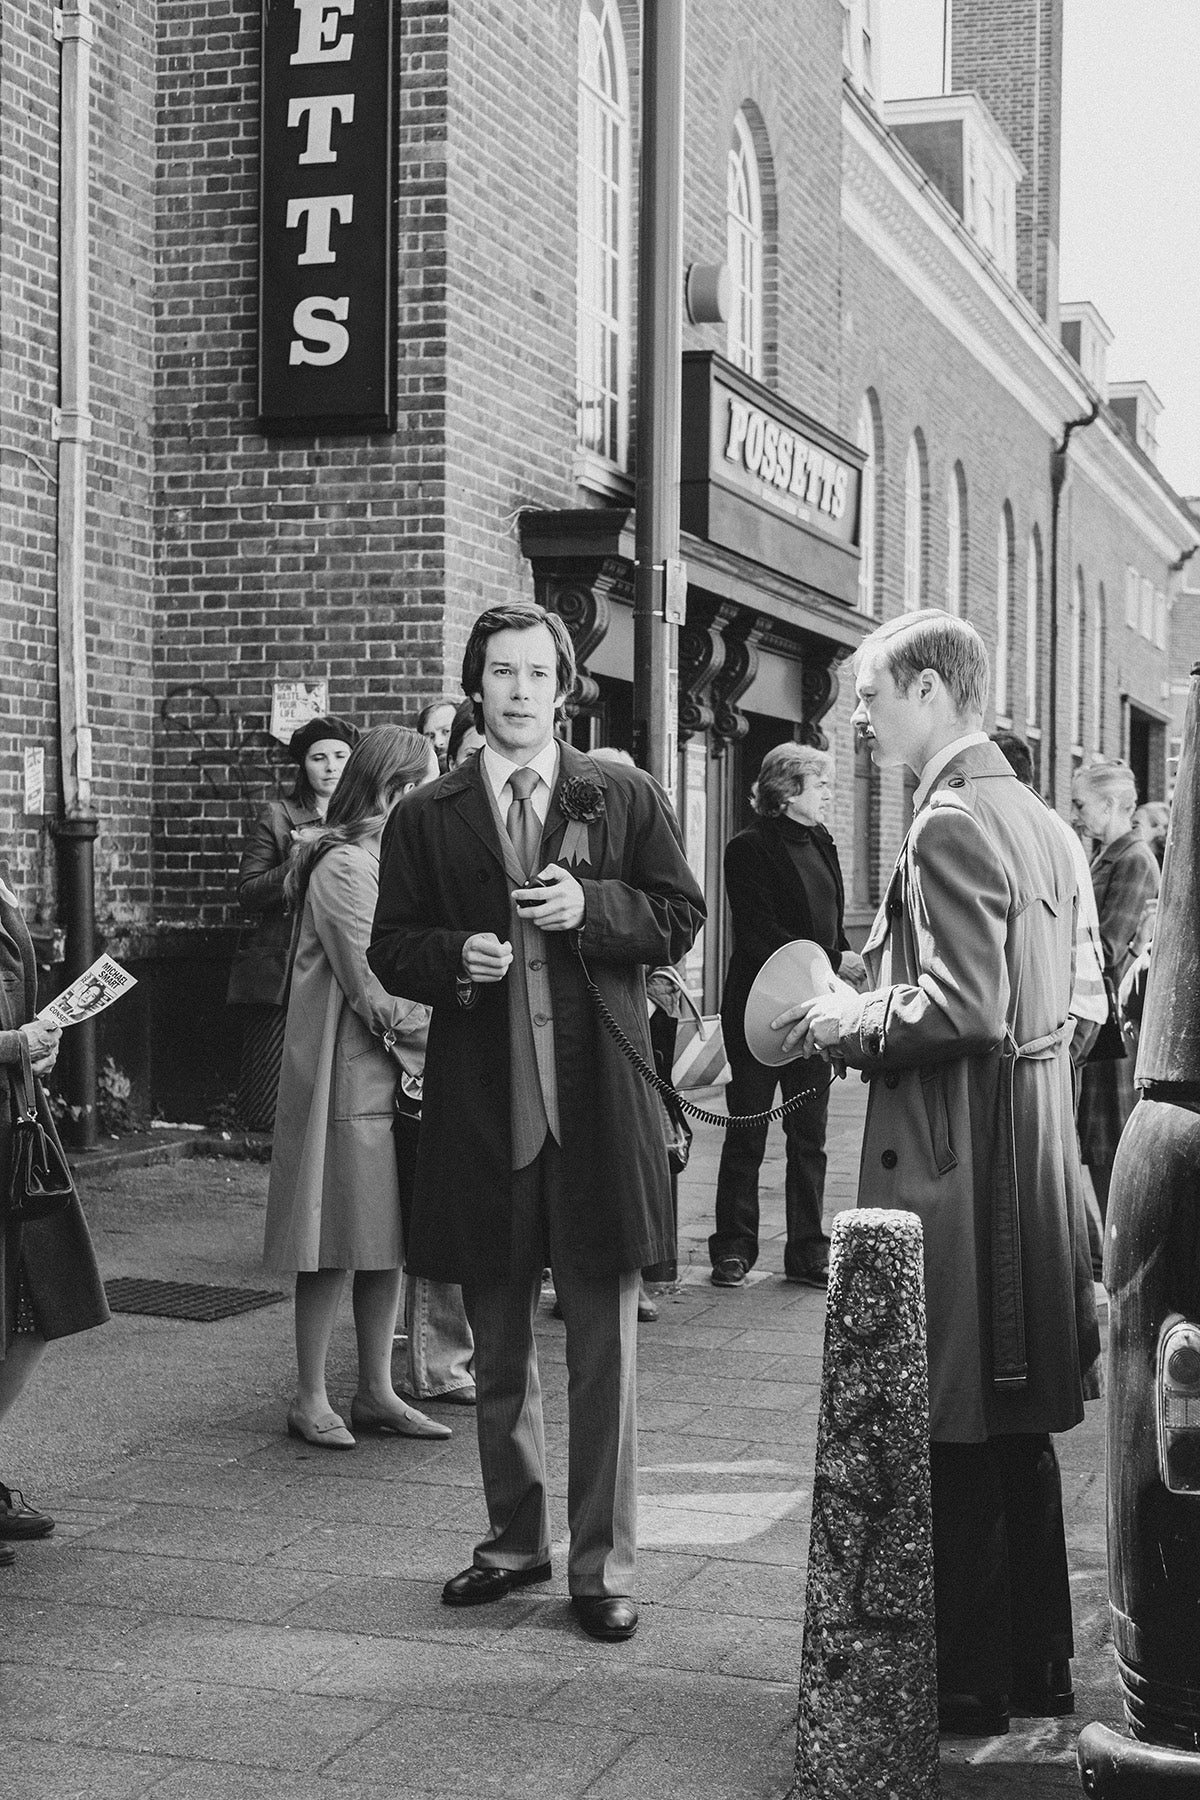 Black and white photograph by David Hurn for Black Mirror, showing a crowd of people dressed in the style of the 1970s gathered outside a shop named Possetts